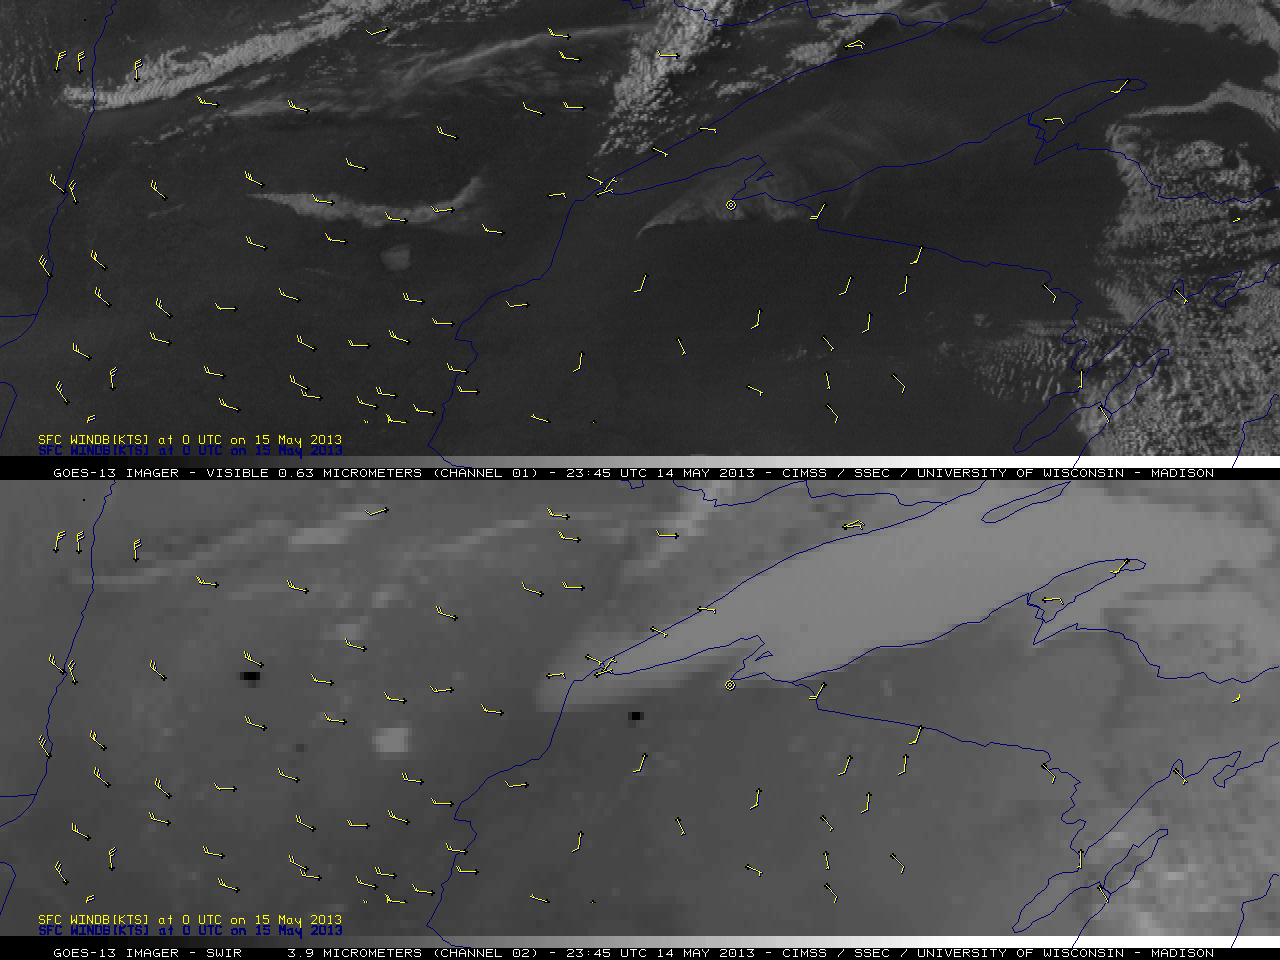 GOES-13 0.63 Âµm visible channel (top) and 3.9 Âµm shortwave IR channel (bottom) images (click to play animation)